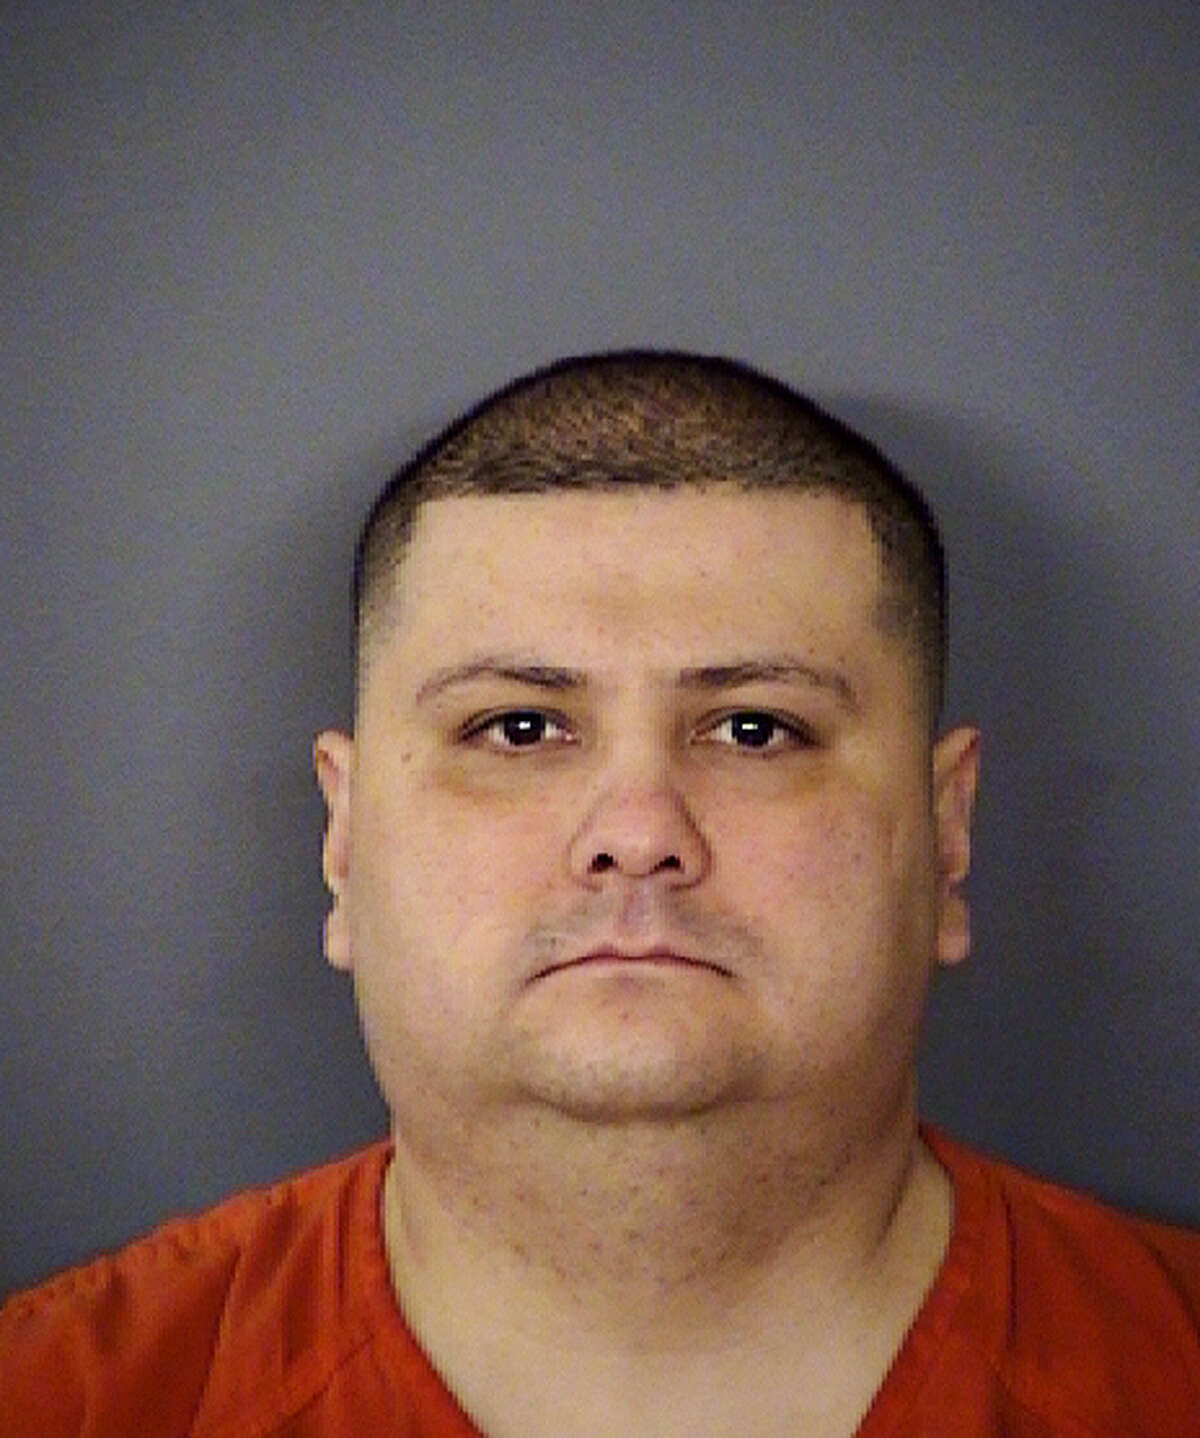 This undated handout photo provided by the Bexar County (Texas) Sheriff's Office, shows Gilbert Flores. Bexar County Sheriff Susan Pamerleau says Flores, who had his hands raised as if to surrender when deputies gunned him down was armed with a knife. She says the deputies believed Flores was holding the knife when they shot him and that investigators are reviewing video of the confrontation. (Bexar County Sheriff's Office, via AP)